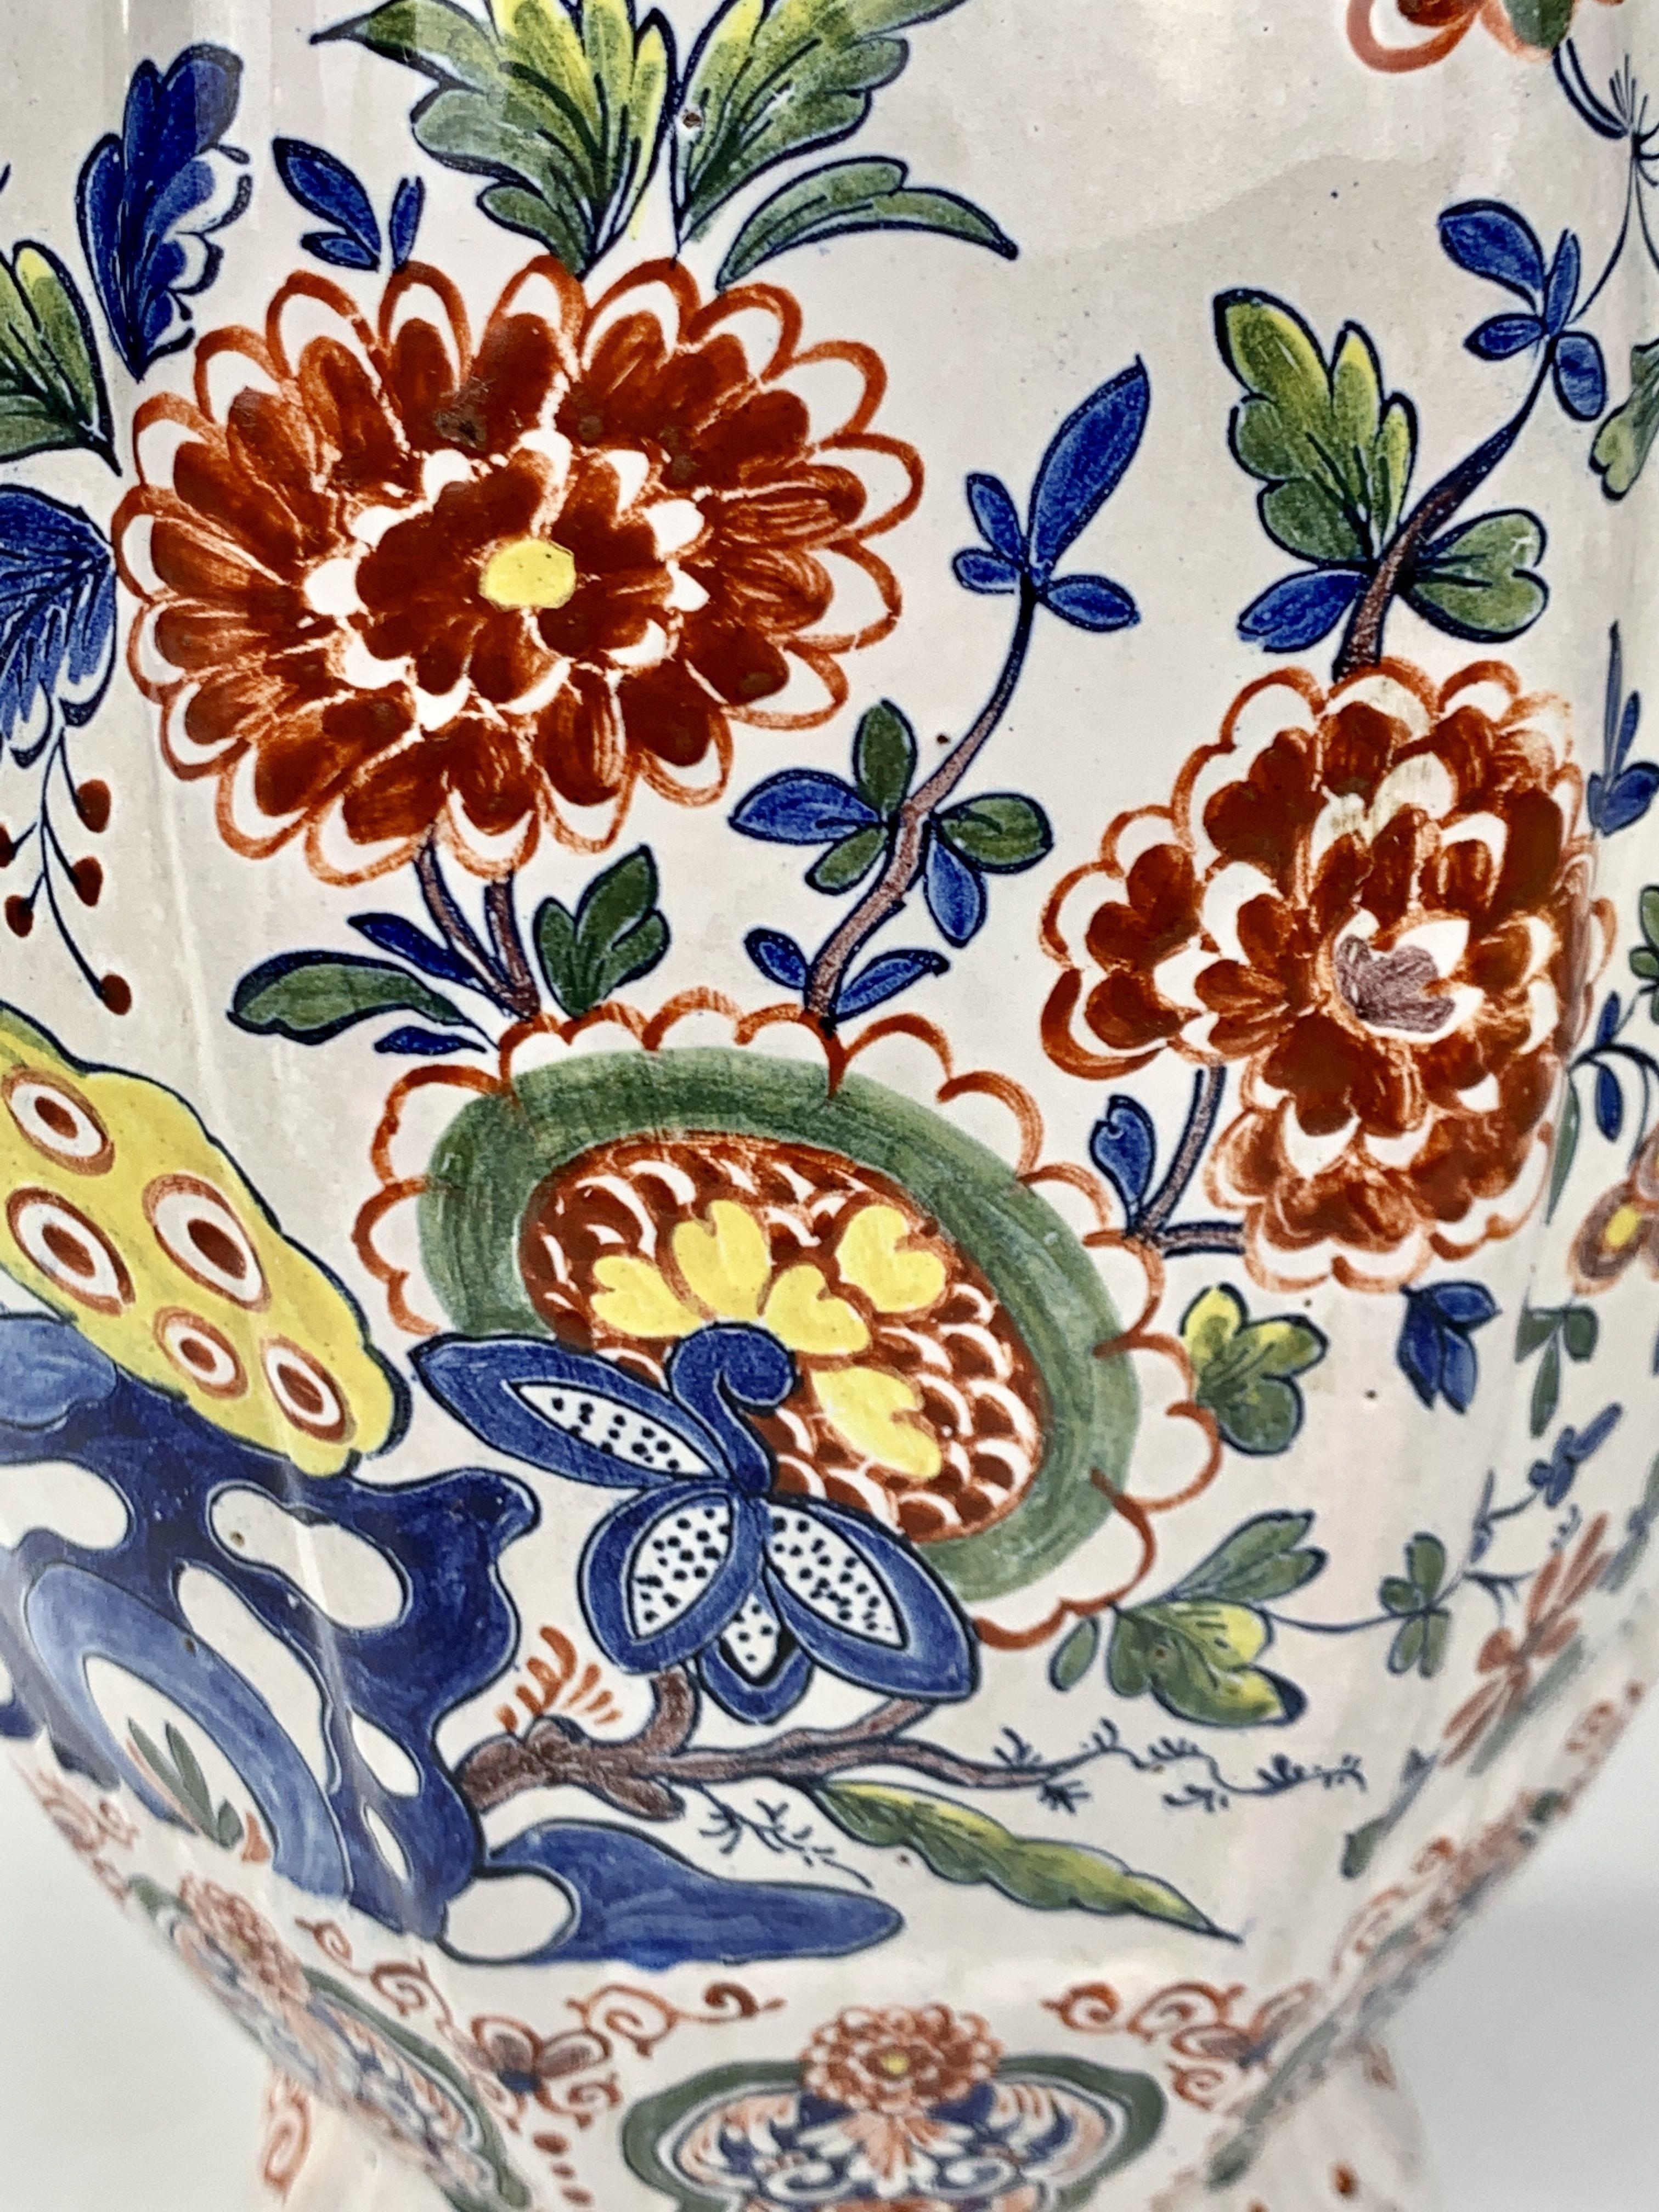 Rococo Dutch Delft Jar Hand-Painted in Traditional Polychrome Colors